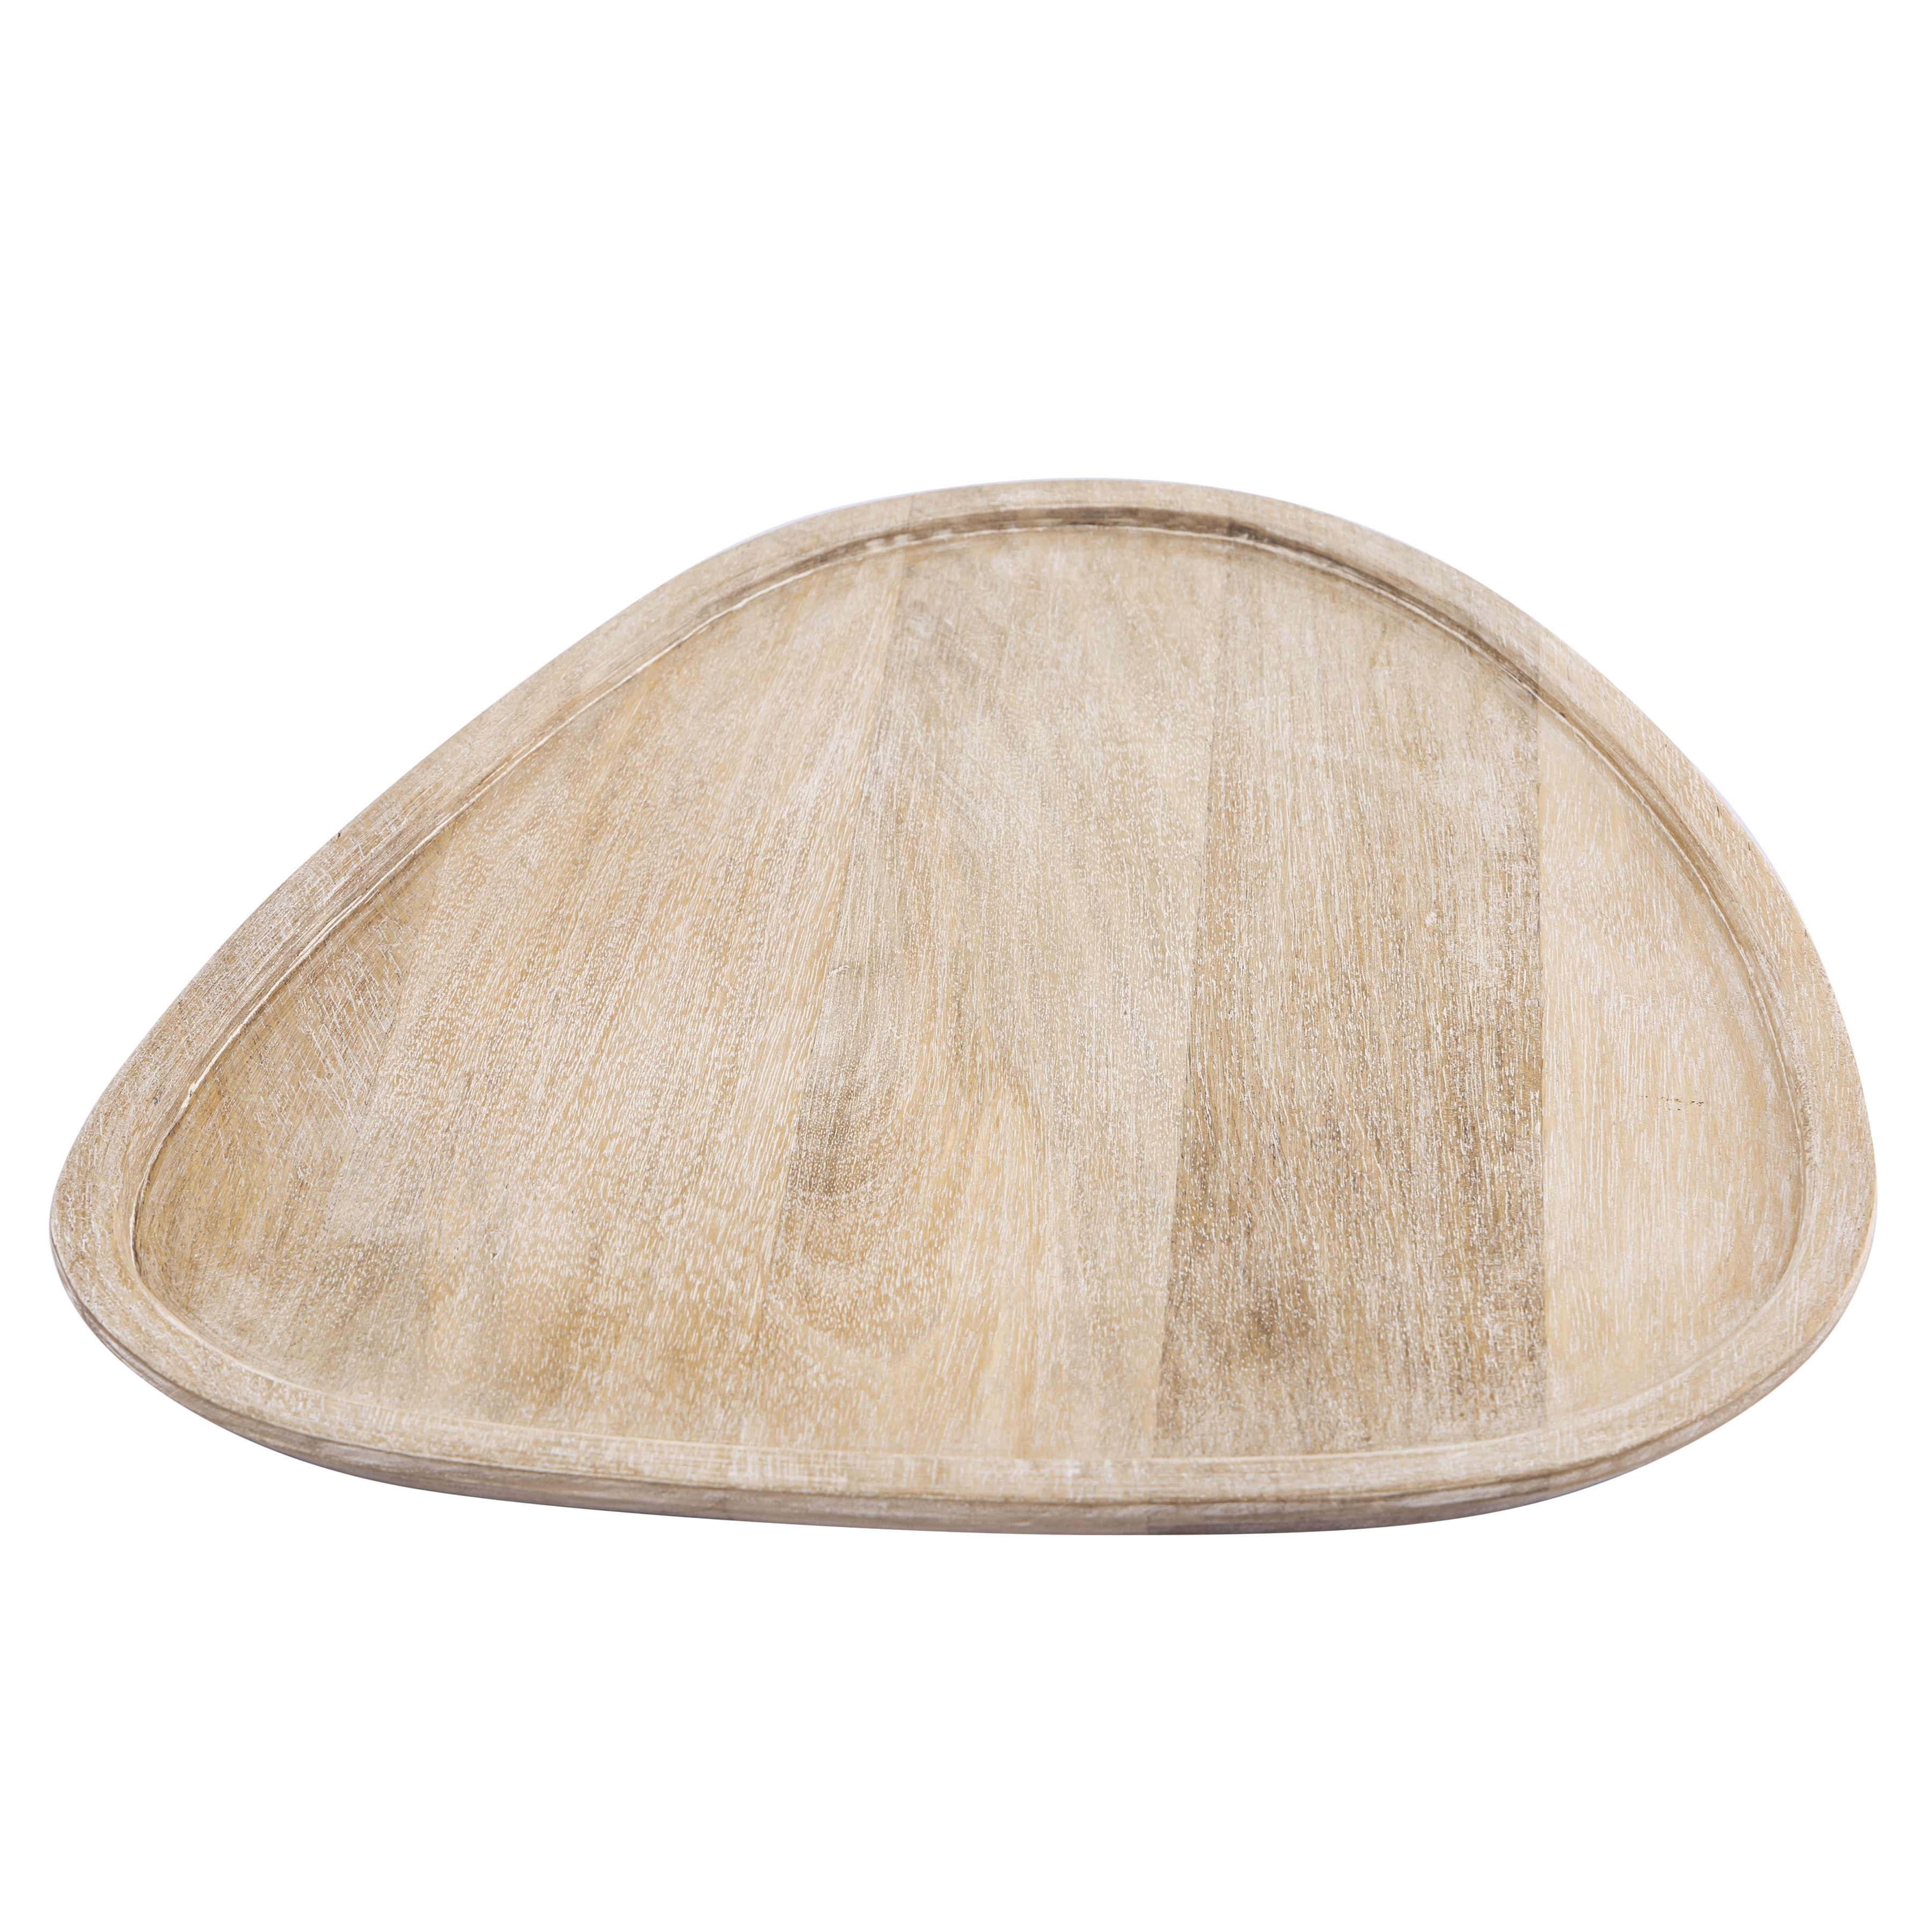 Morris Cerused Tray - Natural - Image 2